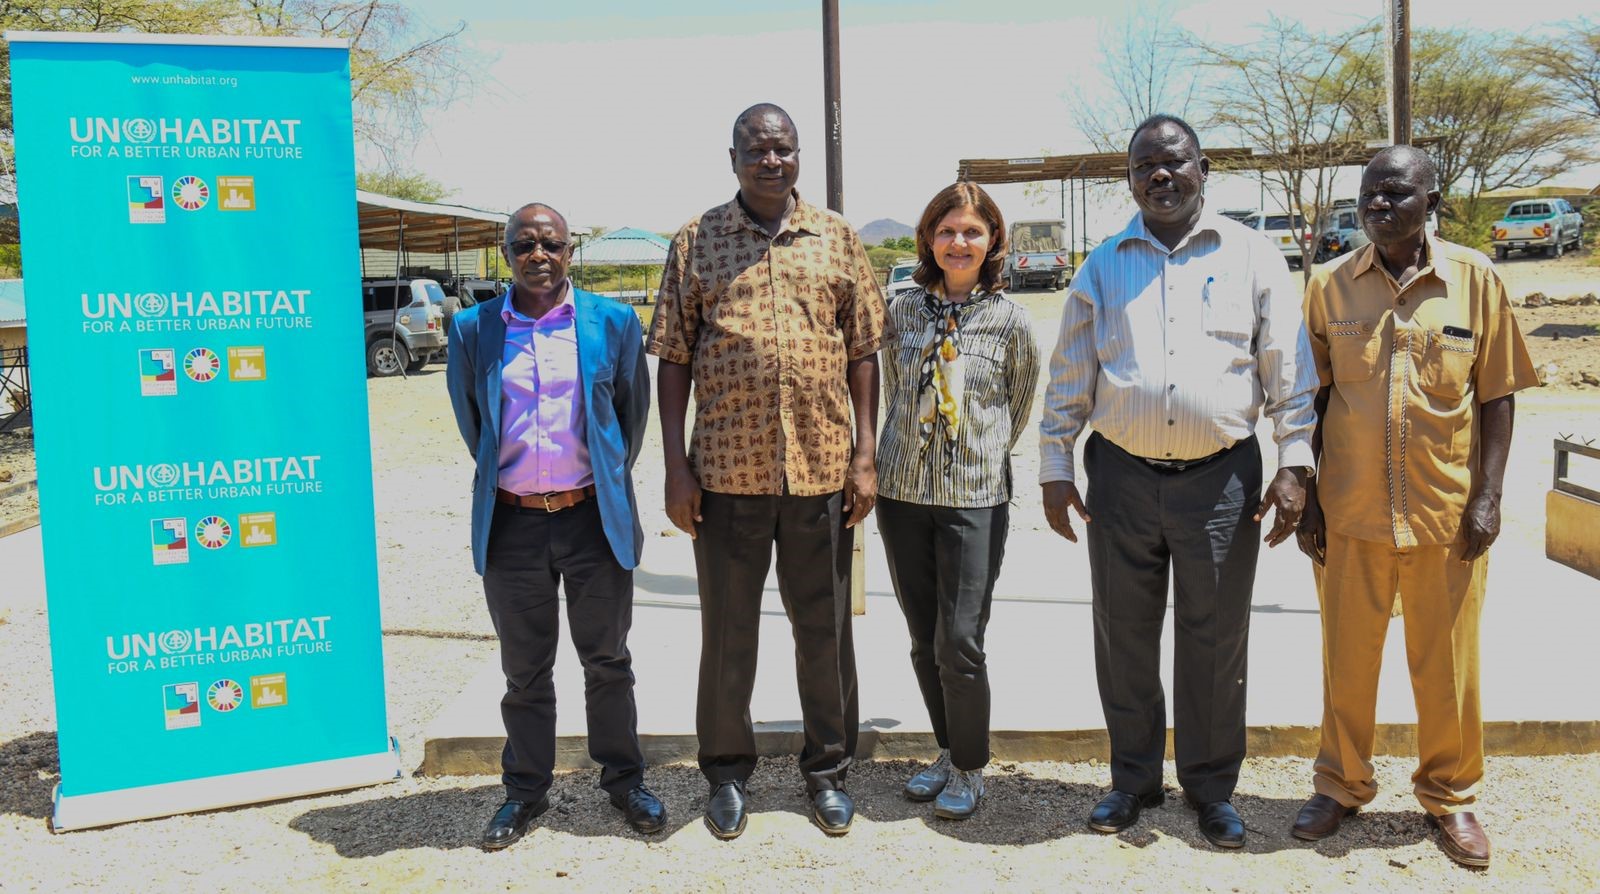 Turkana Country Government Press Service UN-Habitat will continue to work closely with Turkana County Government to develop sustainable urbanisation for all in Turkana.